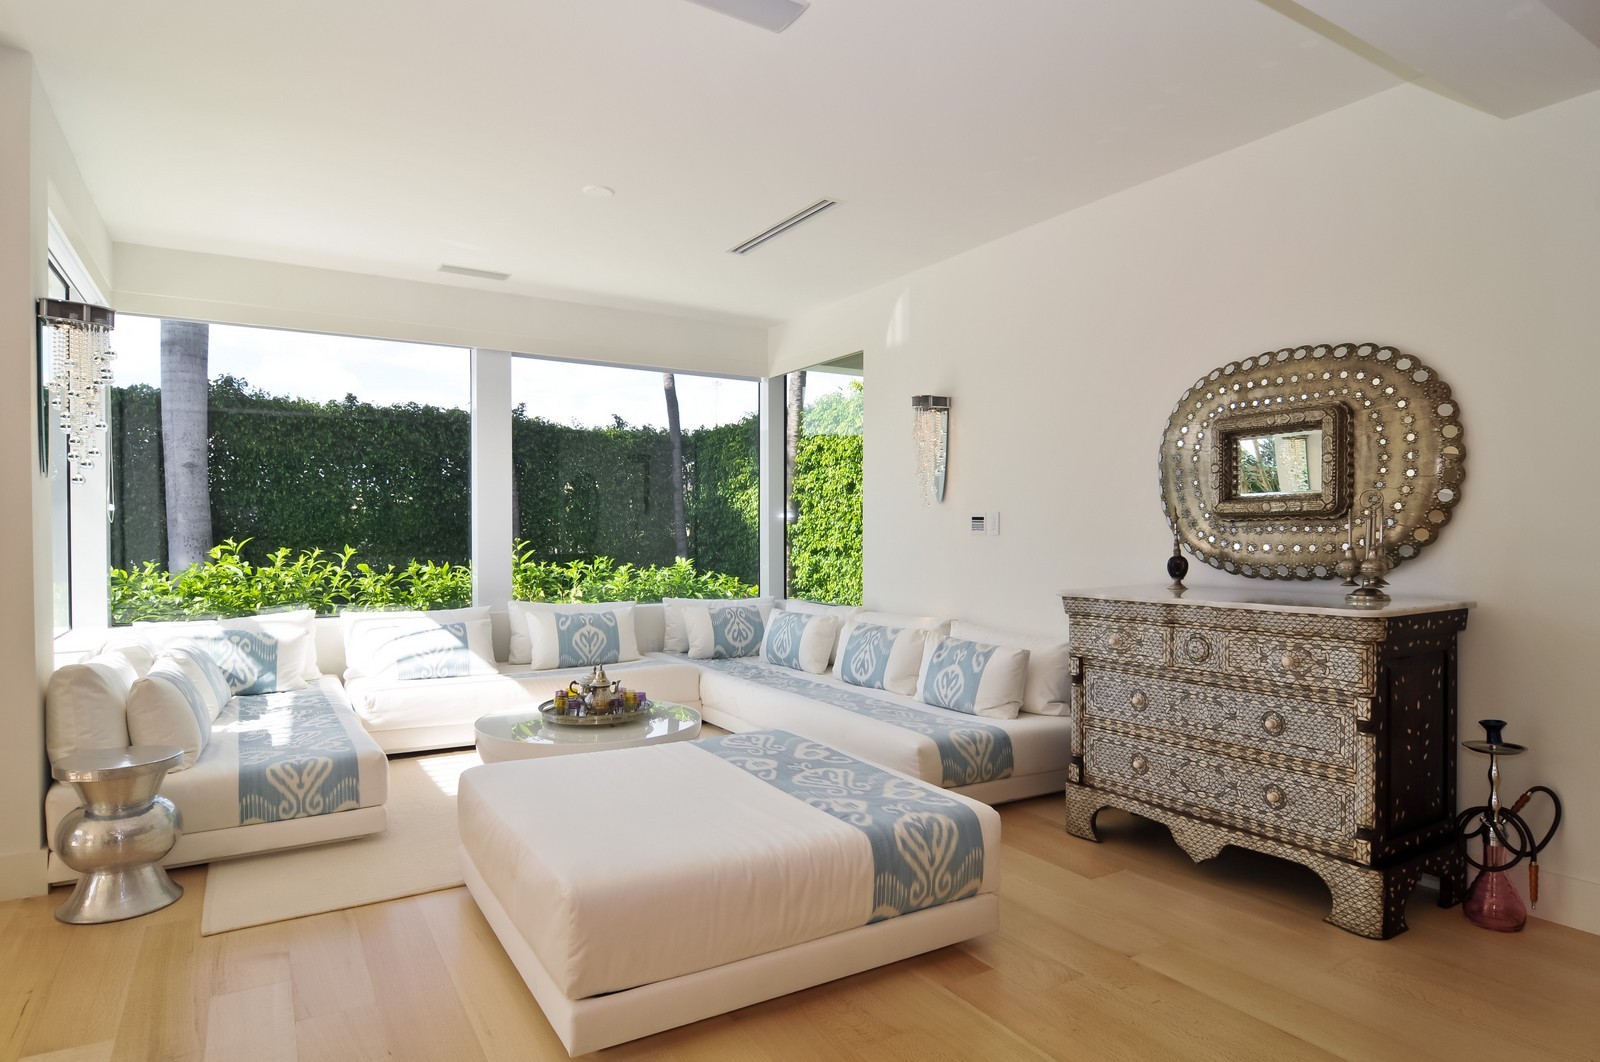 One of the rooms in Shakira's nearly $13 million house. (Genelle Brown/TopTenRealEstate)